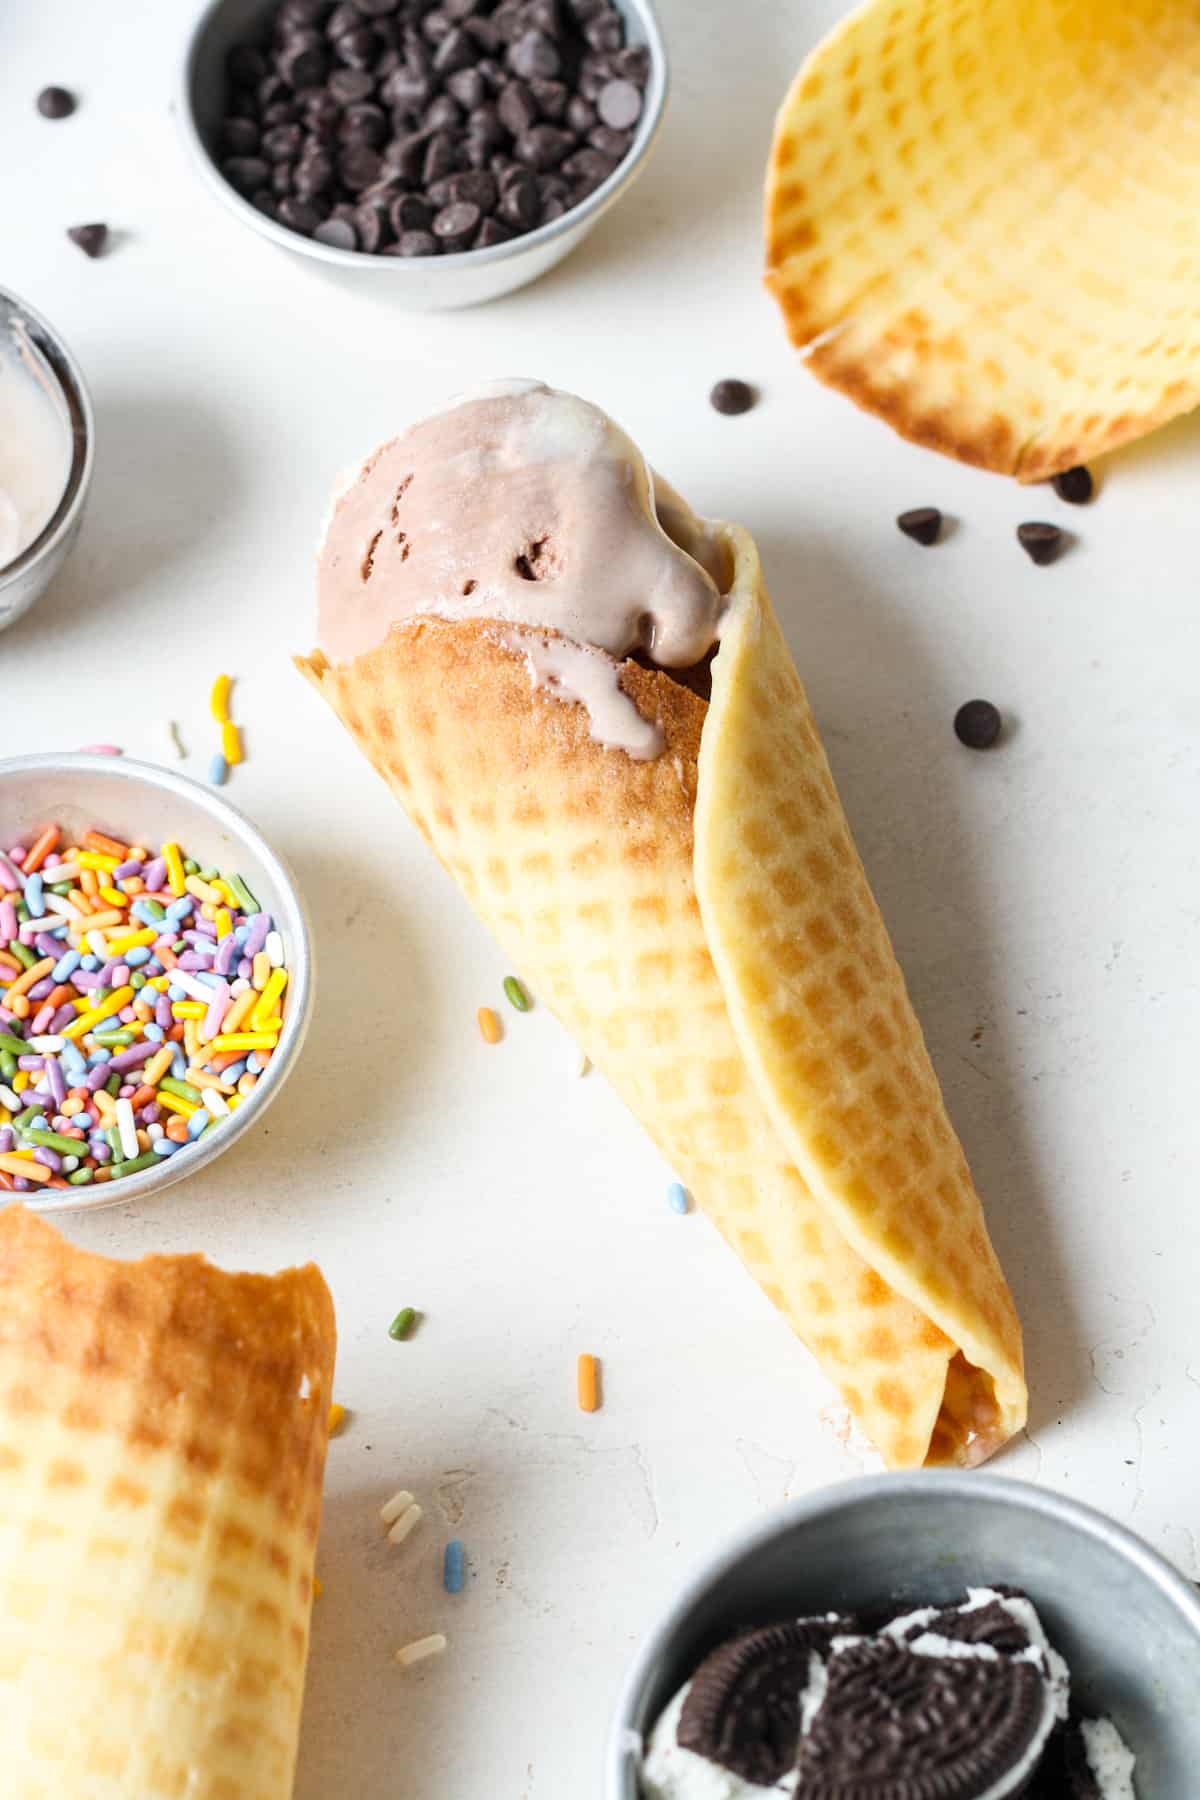 Homemade Vegan Waffle Cones and Bowls - Make It Dairy Free